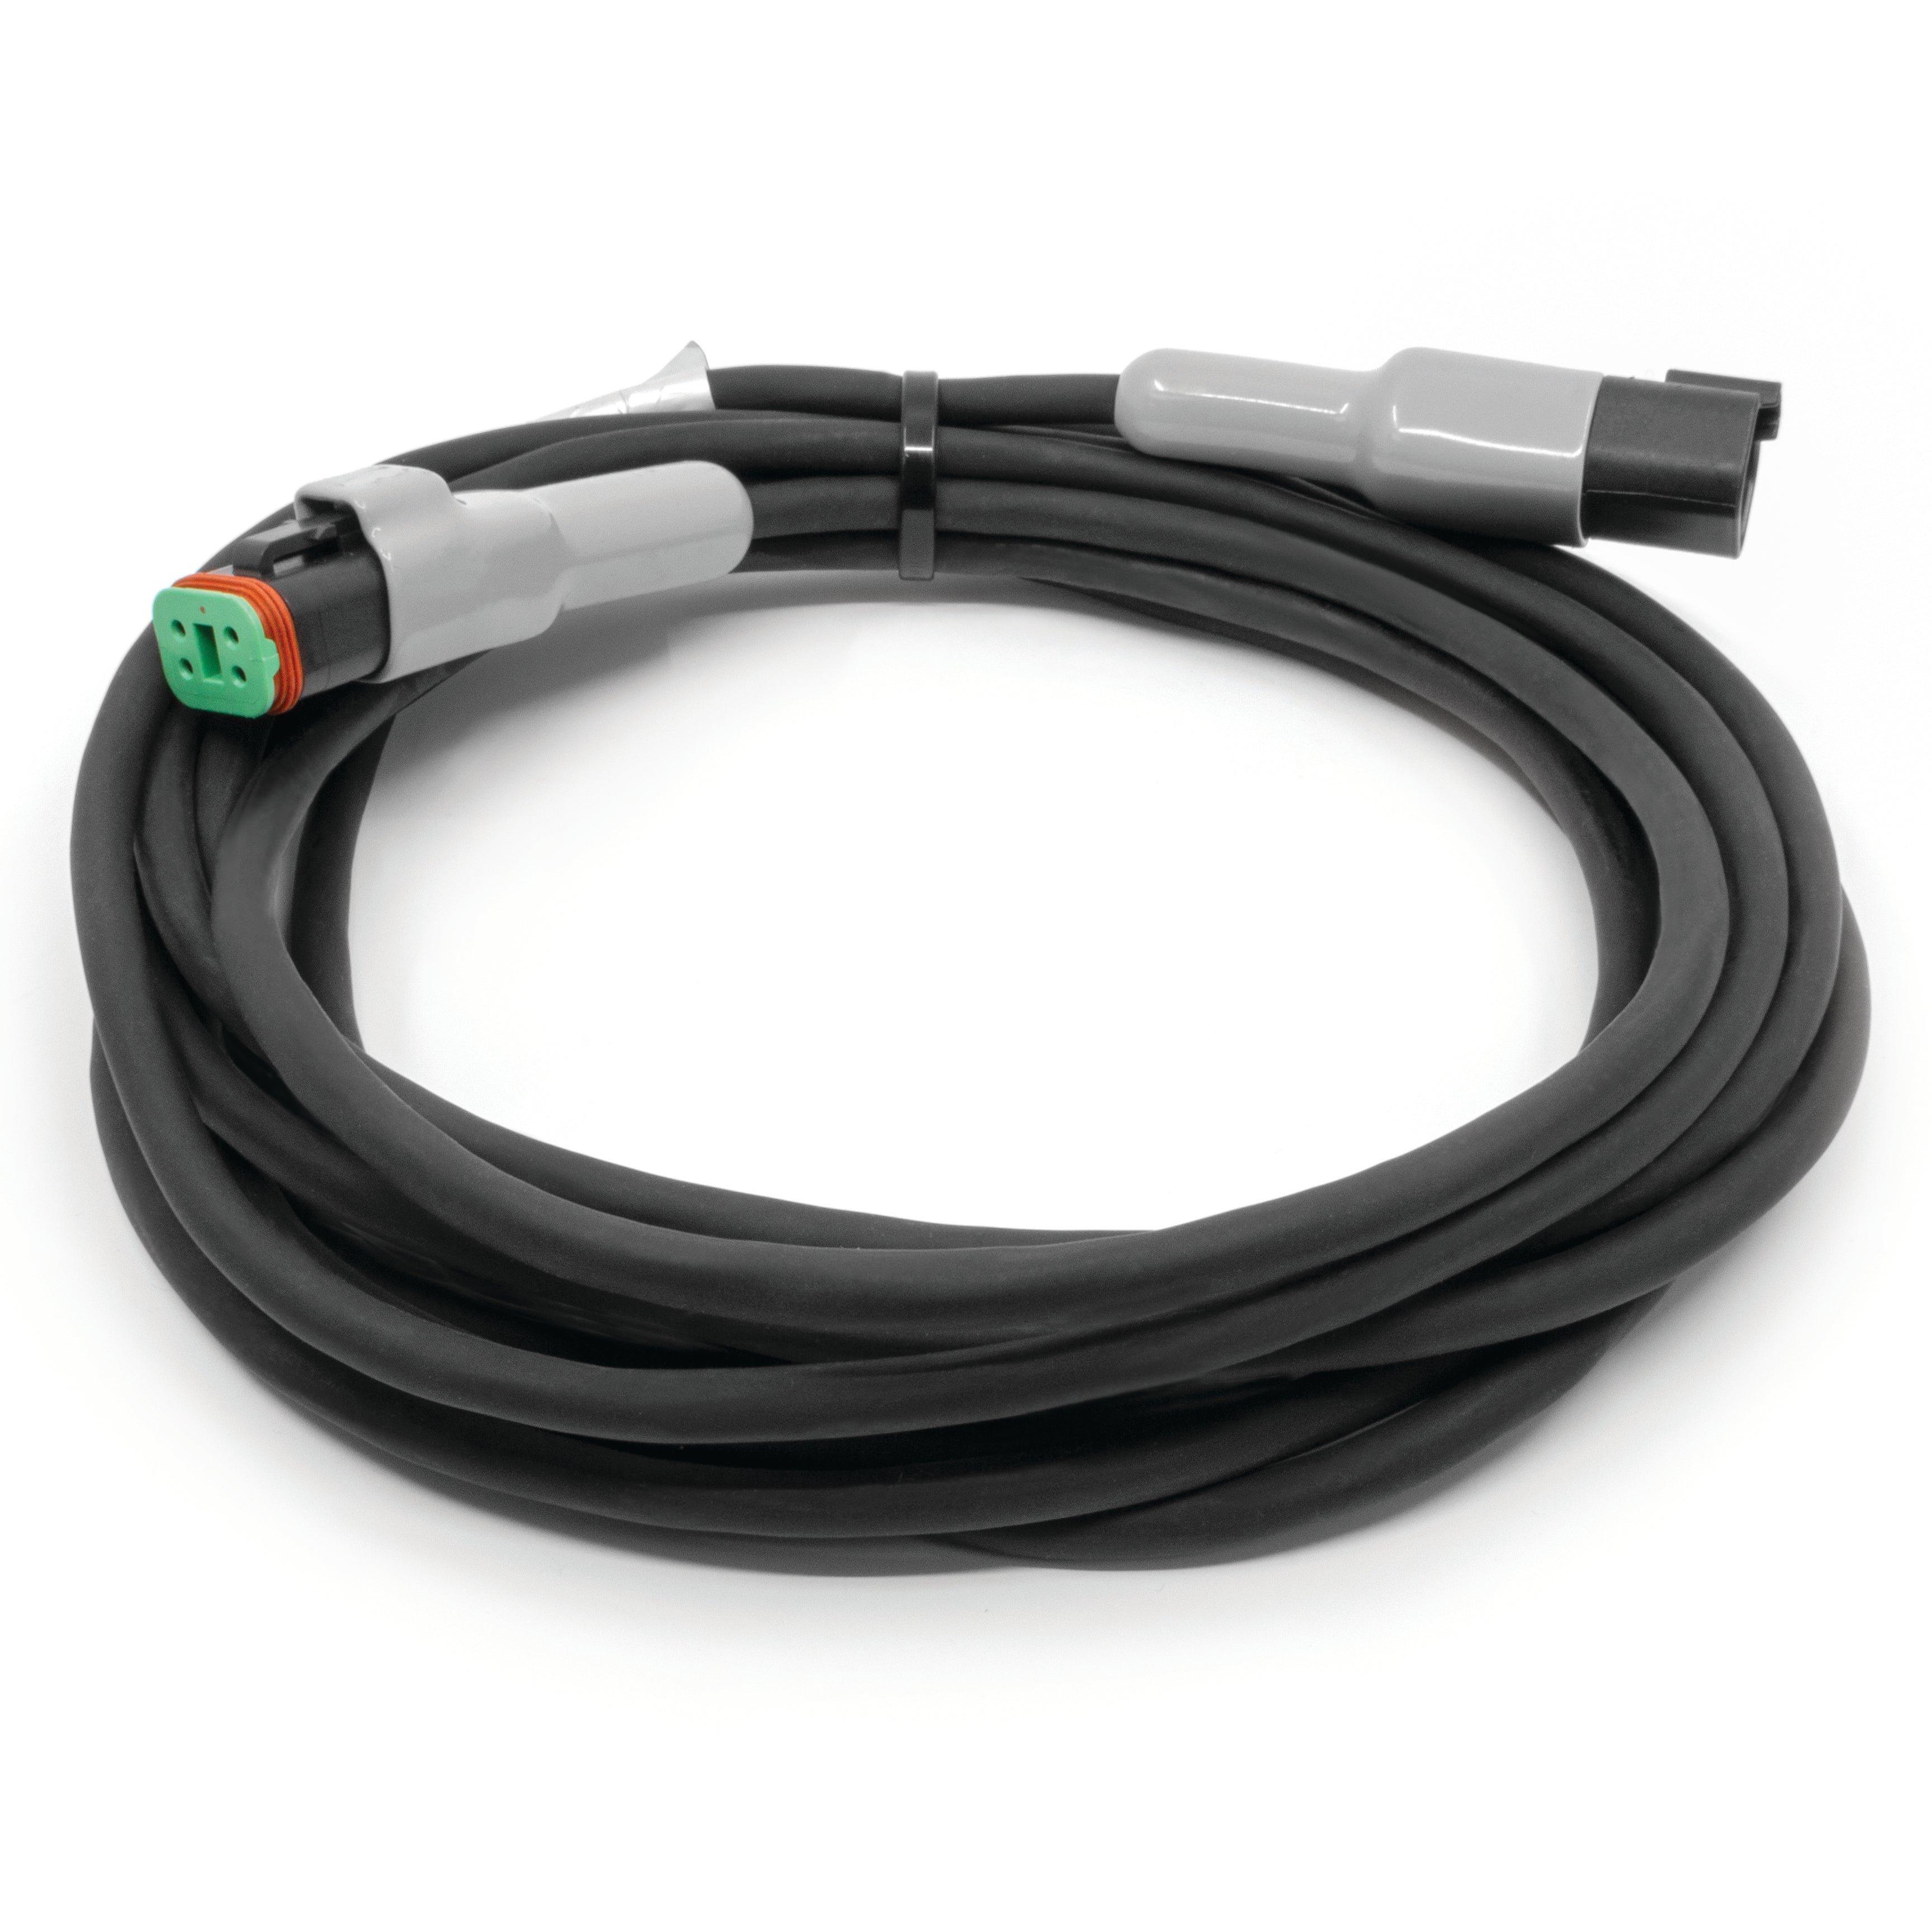 9 metre extension cable for Backsense radar detection systems